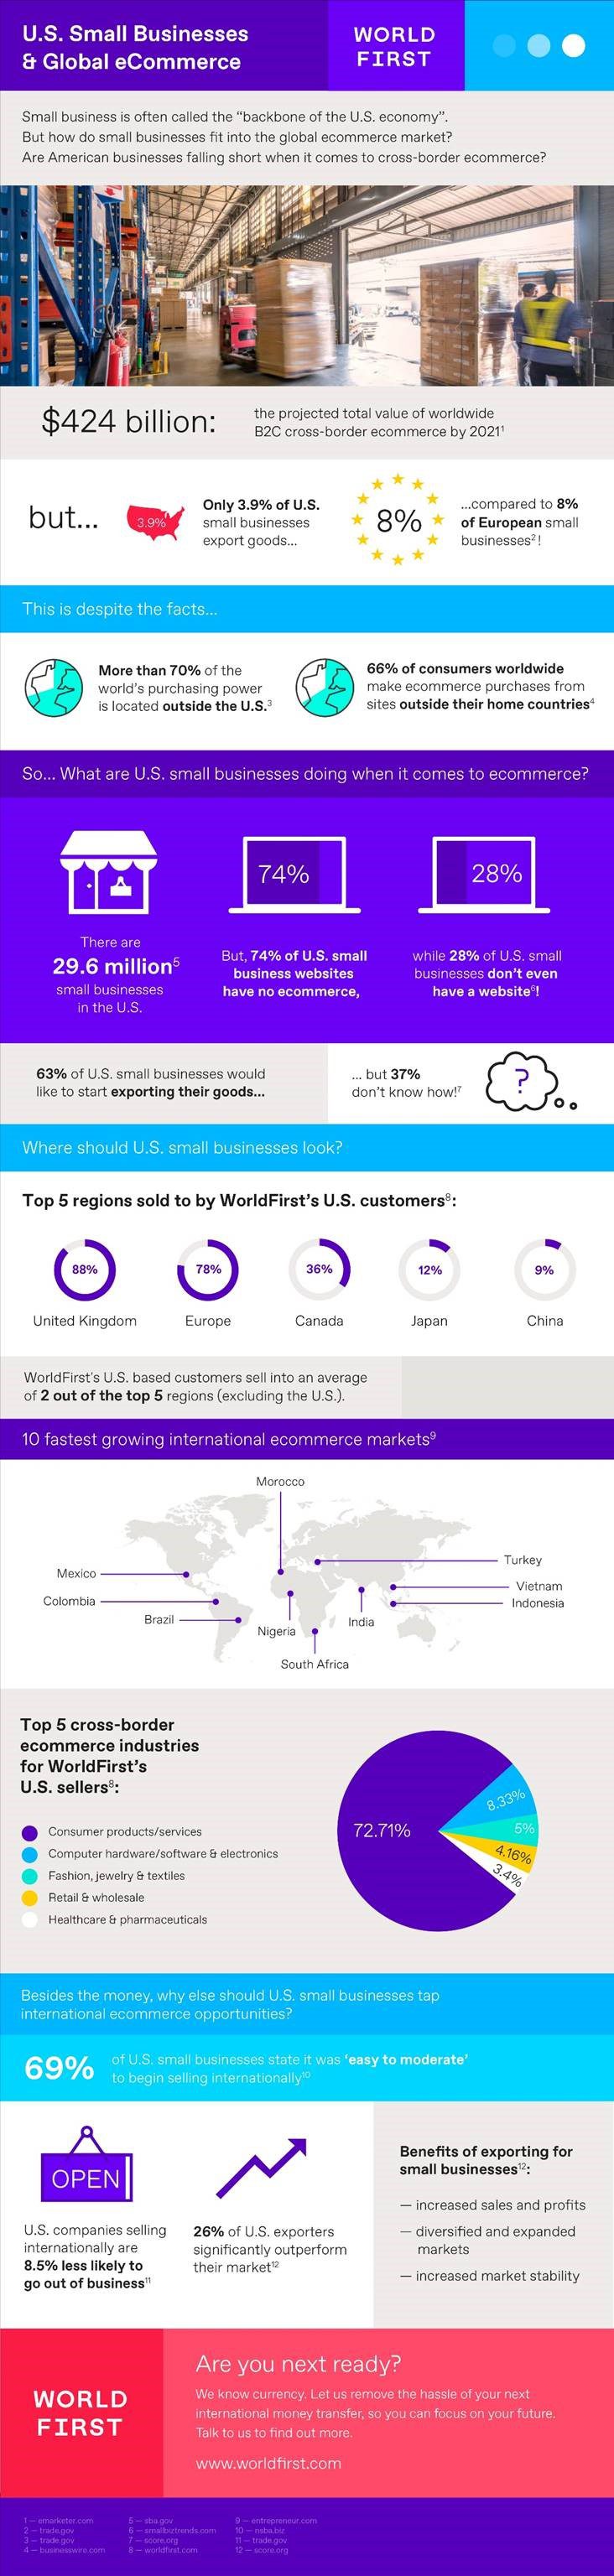 WorldFirst Infographic